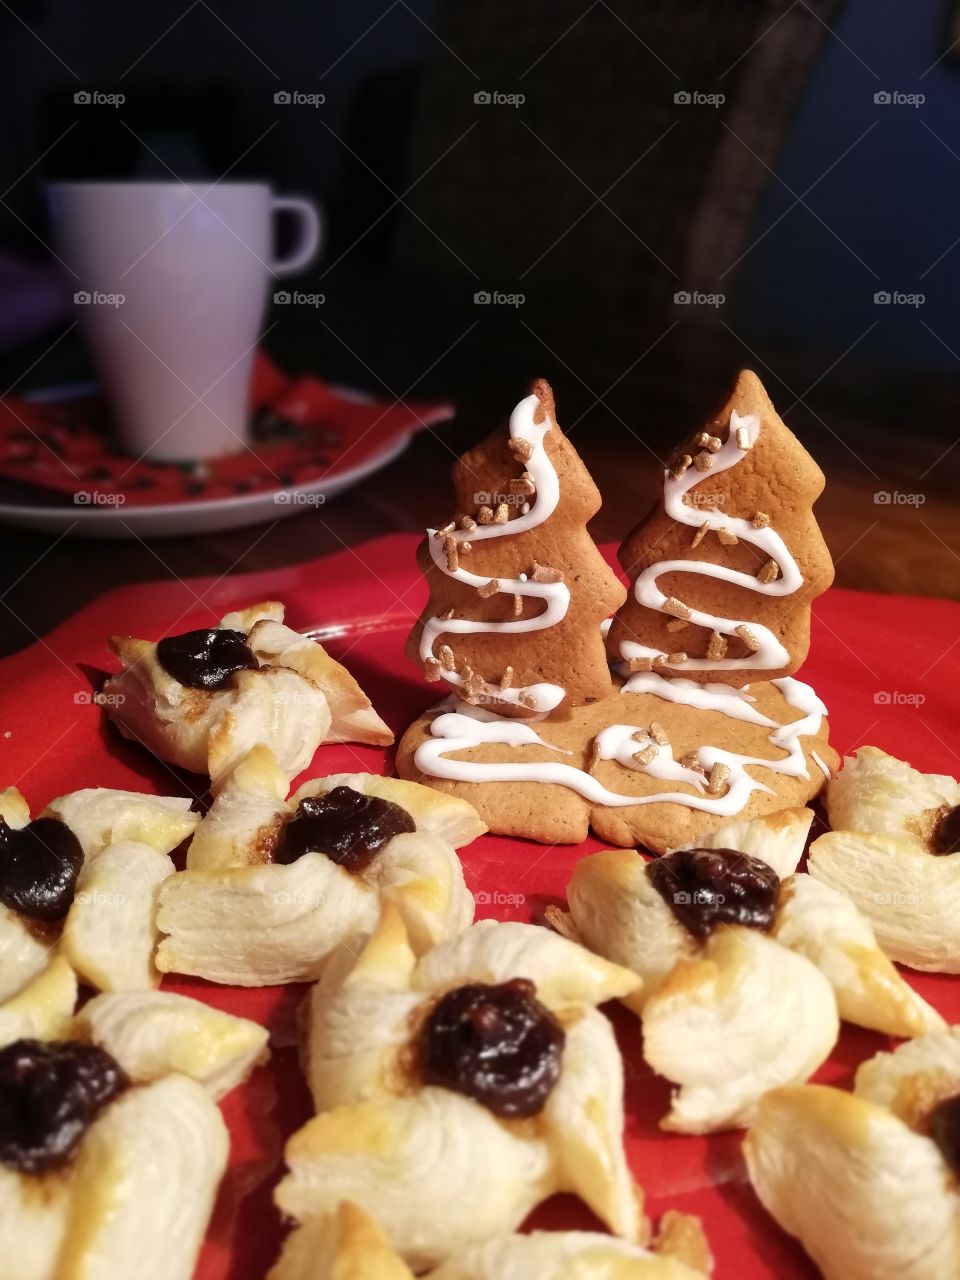 A star shaped red plate full of small pastries with plum jam. A gingerbread decoration with two sugary coated trees with golden pieces. A coffee cup on the multicoloured napkin on a white plate.